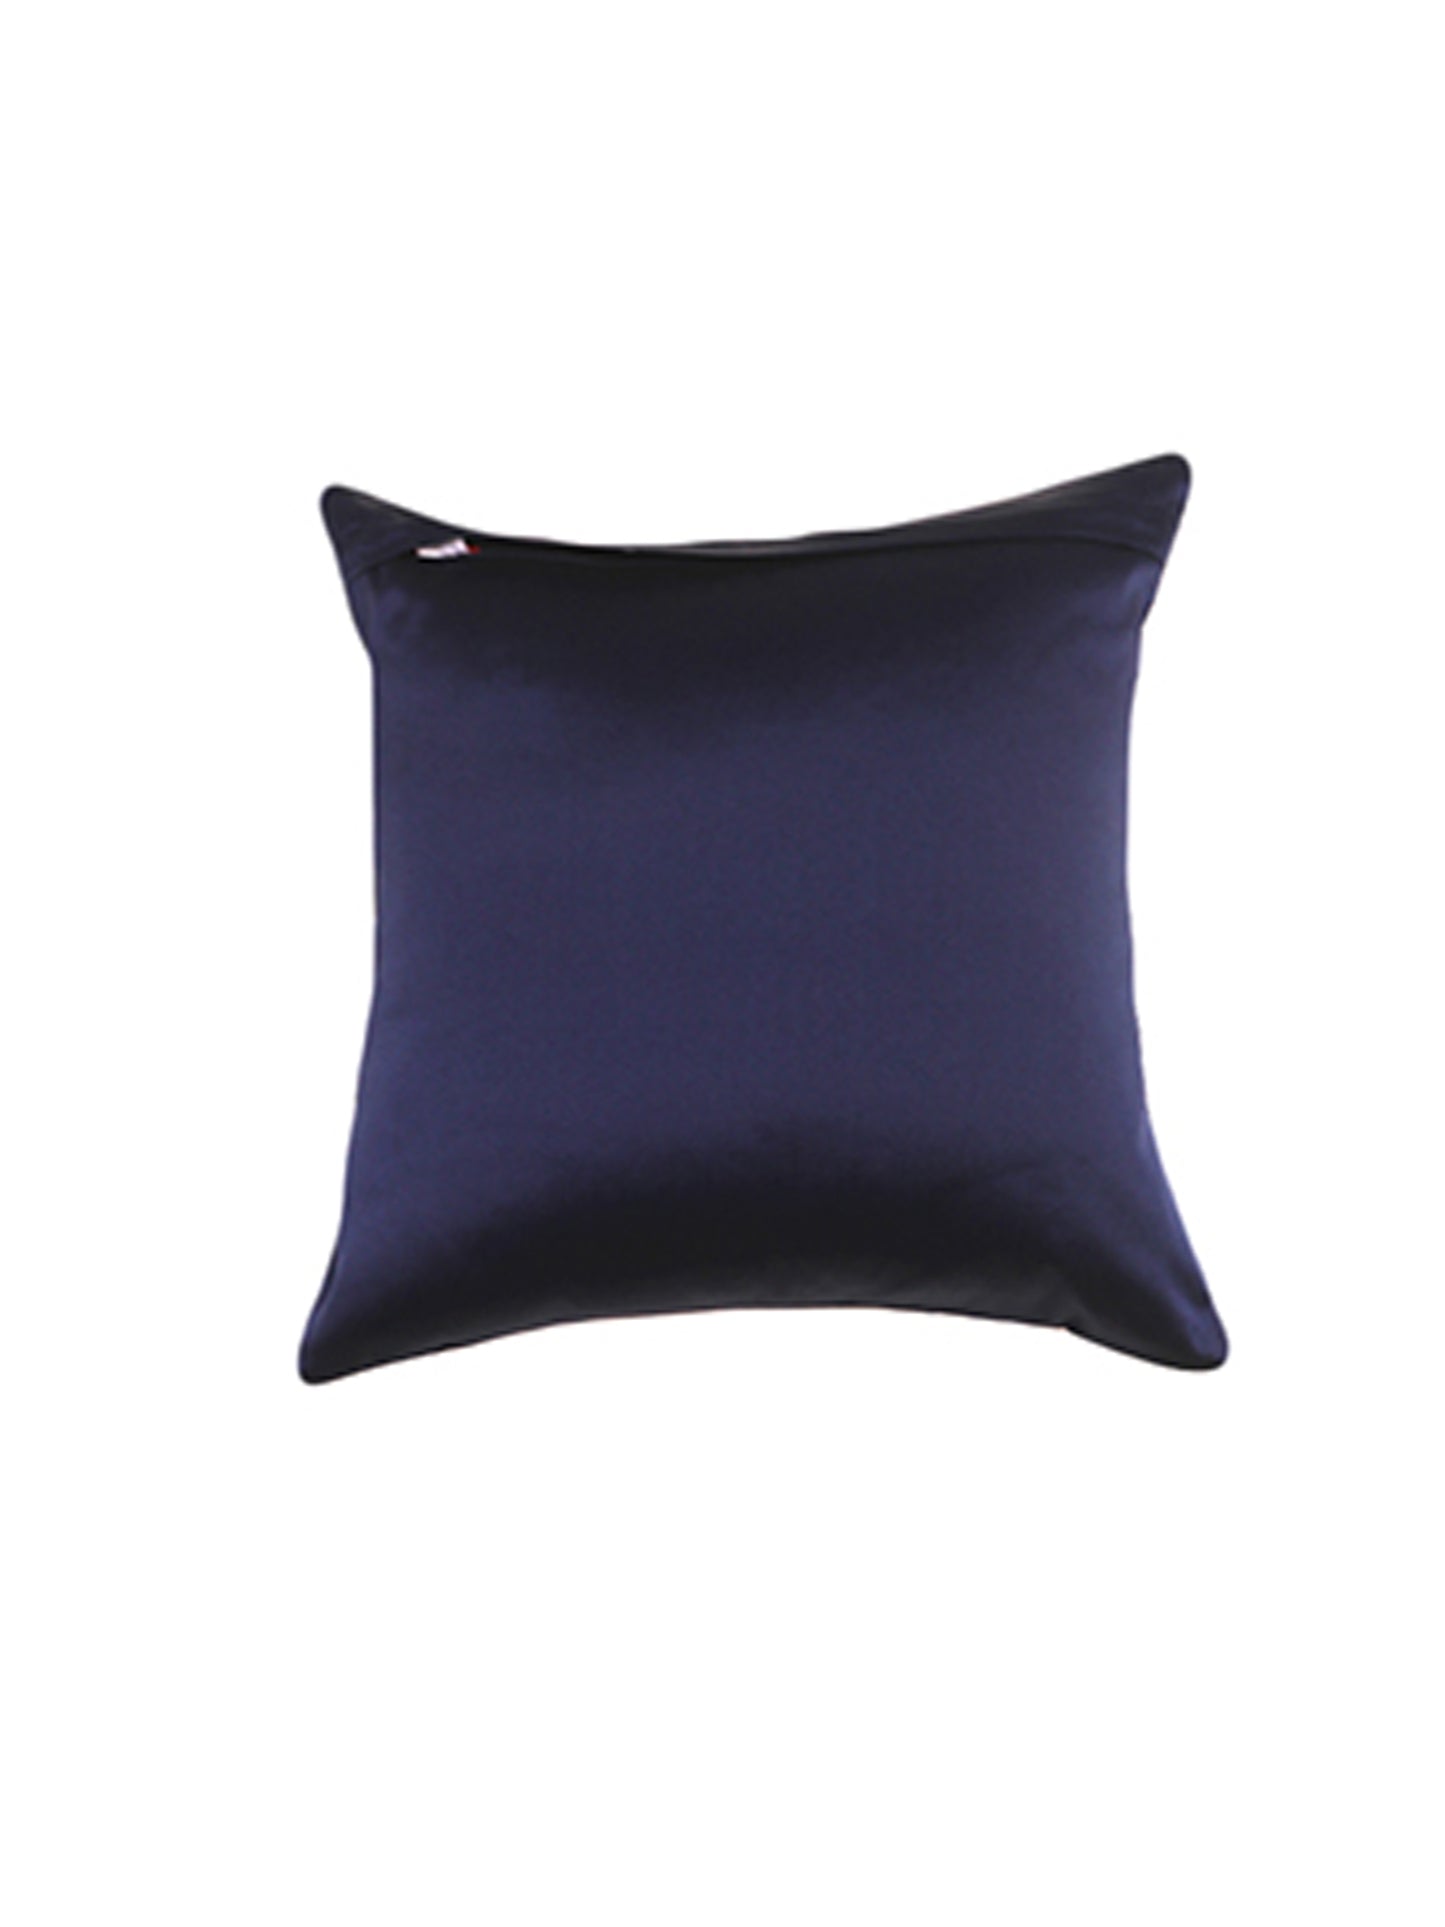 Pleating Cushion cover 100% Polyester in Dark Blue - 12"x12"